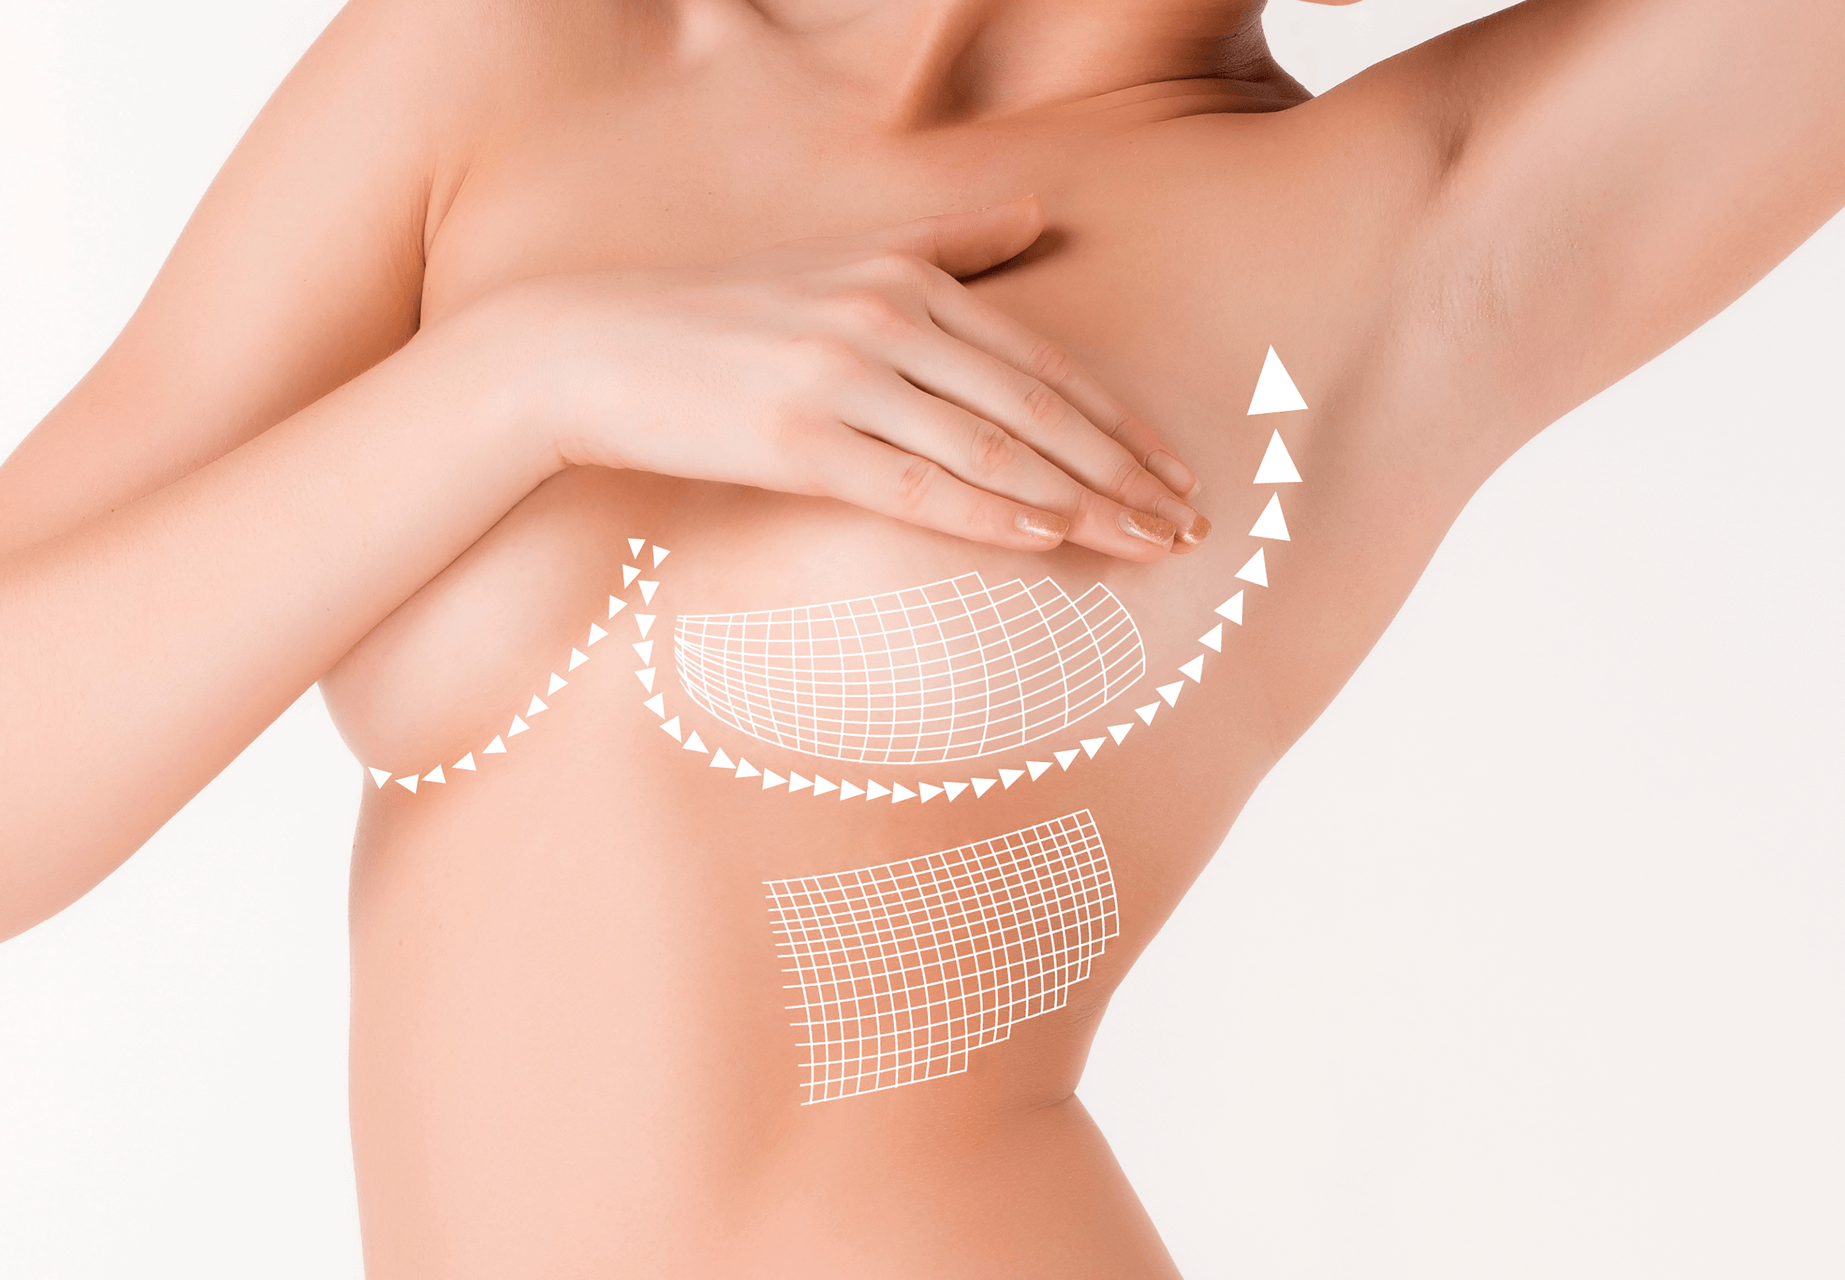 POLYTECH Health & Aesthetics English - Underwire bras can make your breasts  look perky and beautiful but you need to avoid them right after your breast  augmentation! Their structure can irritate your